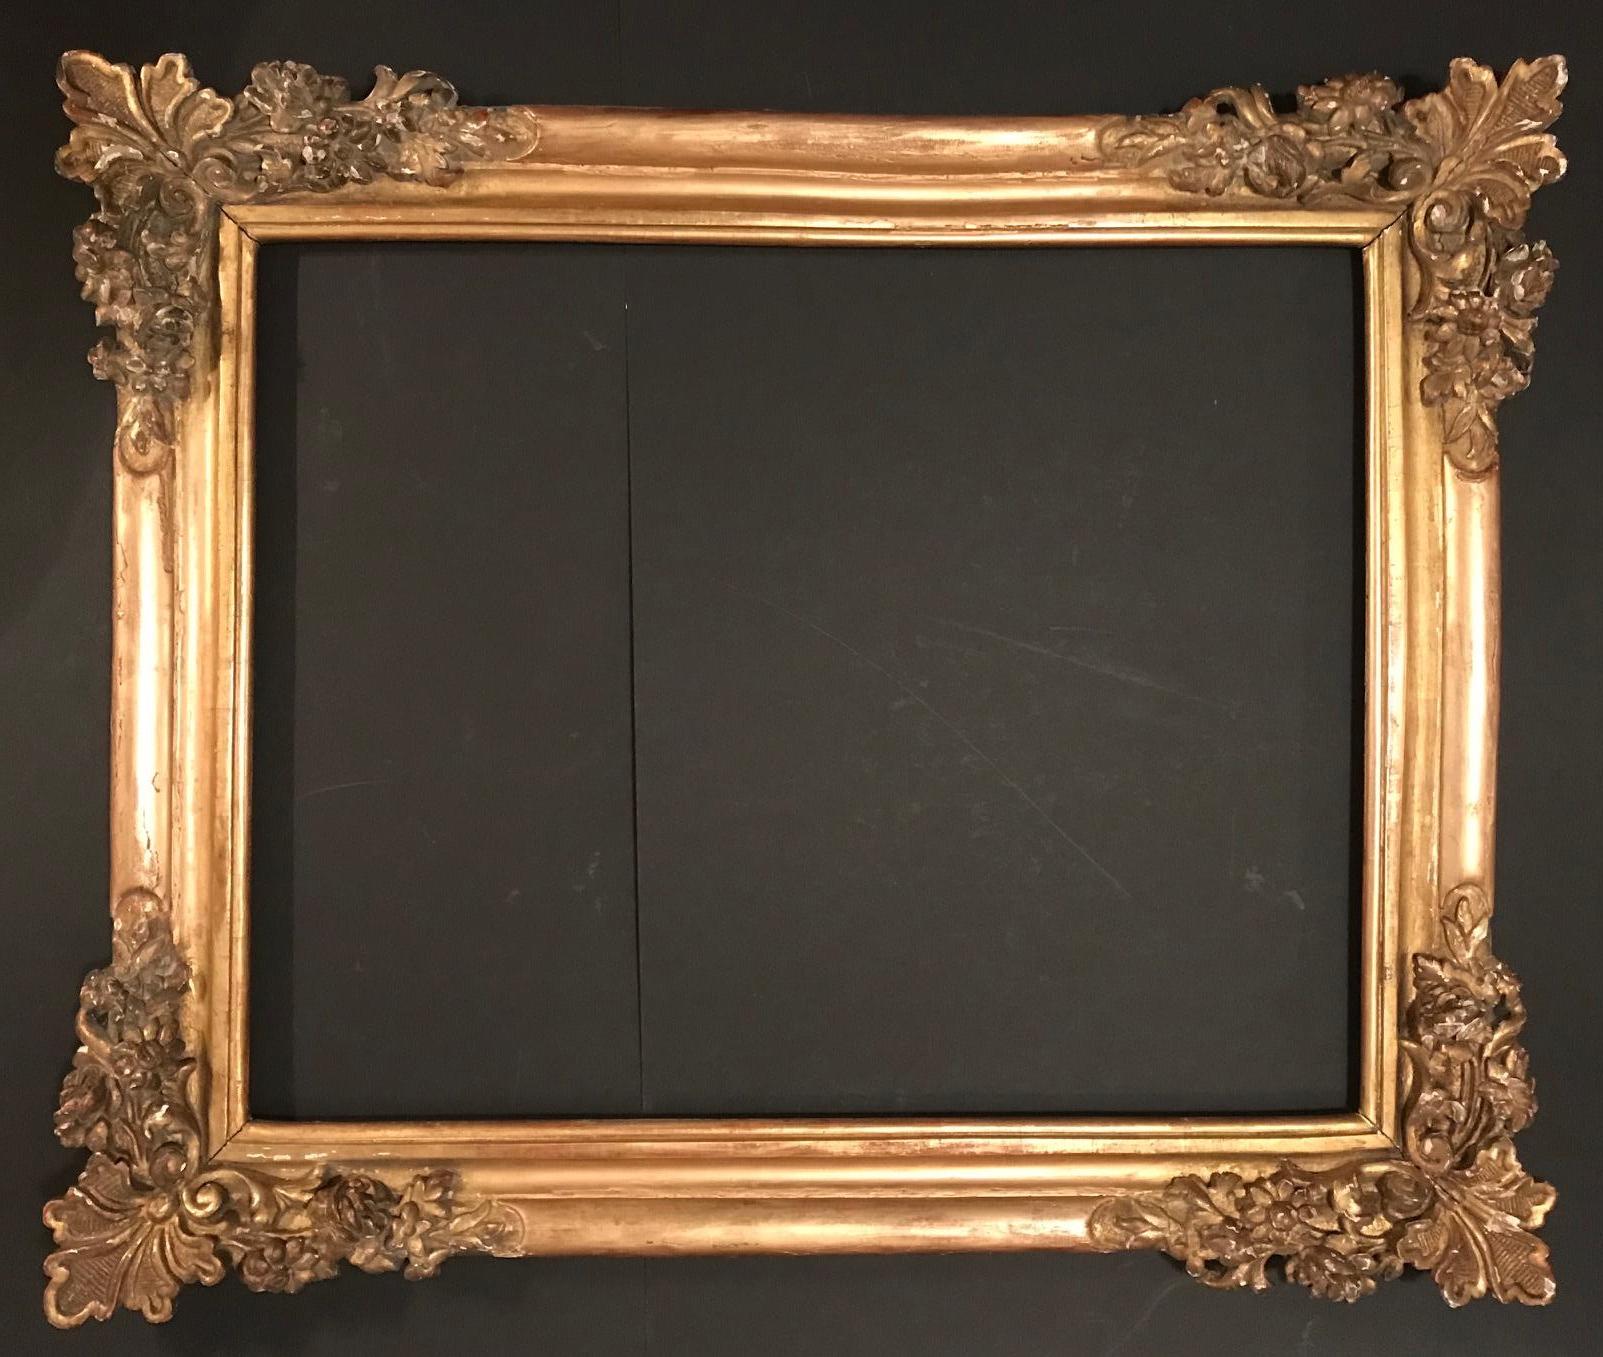 This significant and rare frame dates from the period of Louis XIV, the French Sun King. The rich decoration is hand carved in great detail and gilded over gesso. The fantastic design is a typical example of 17th century French Baroque frames.